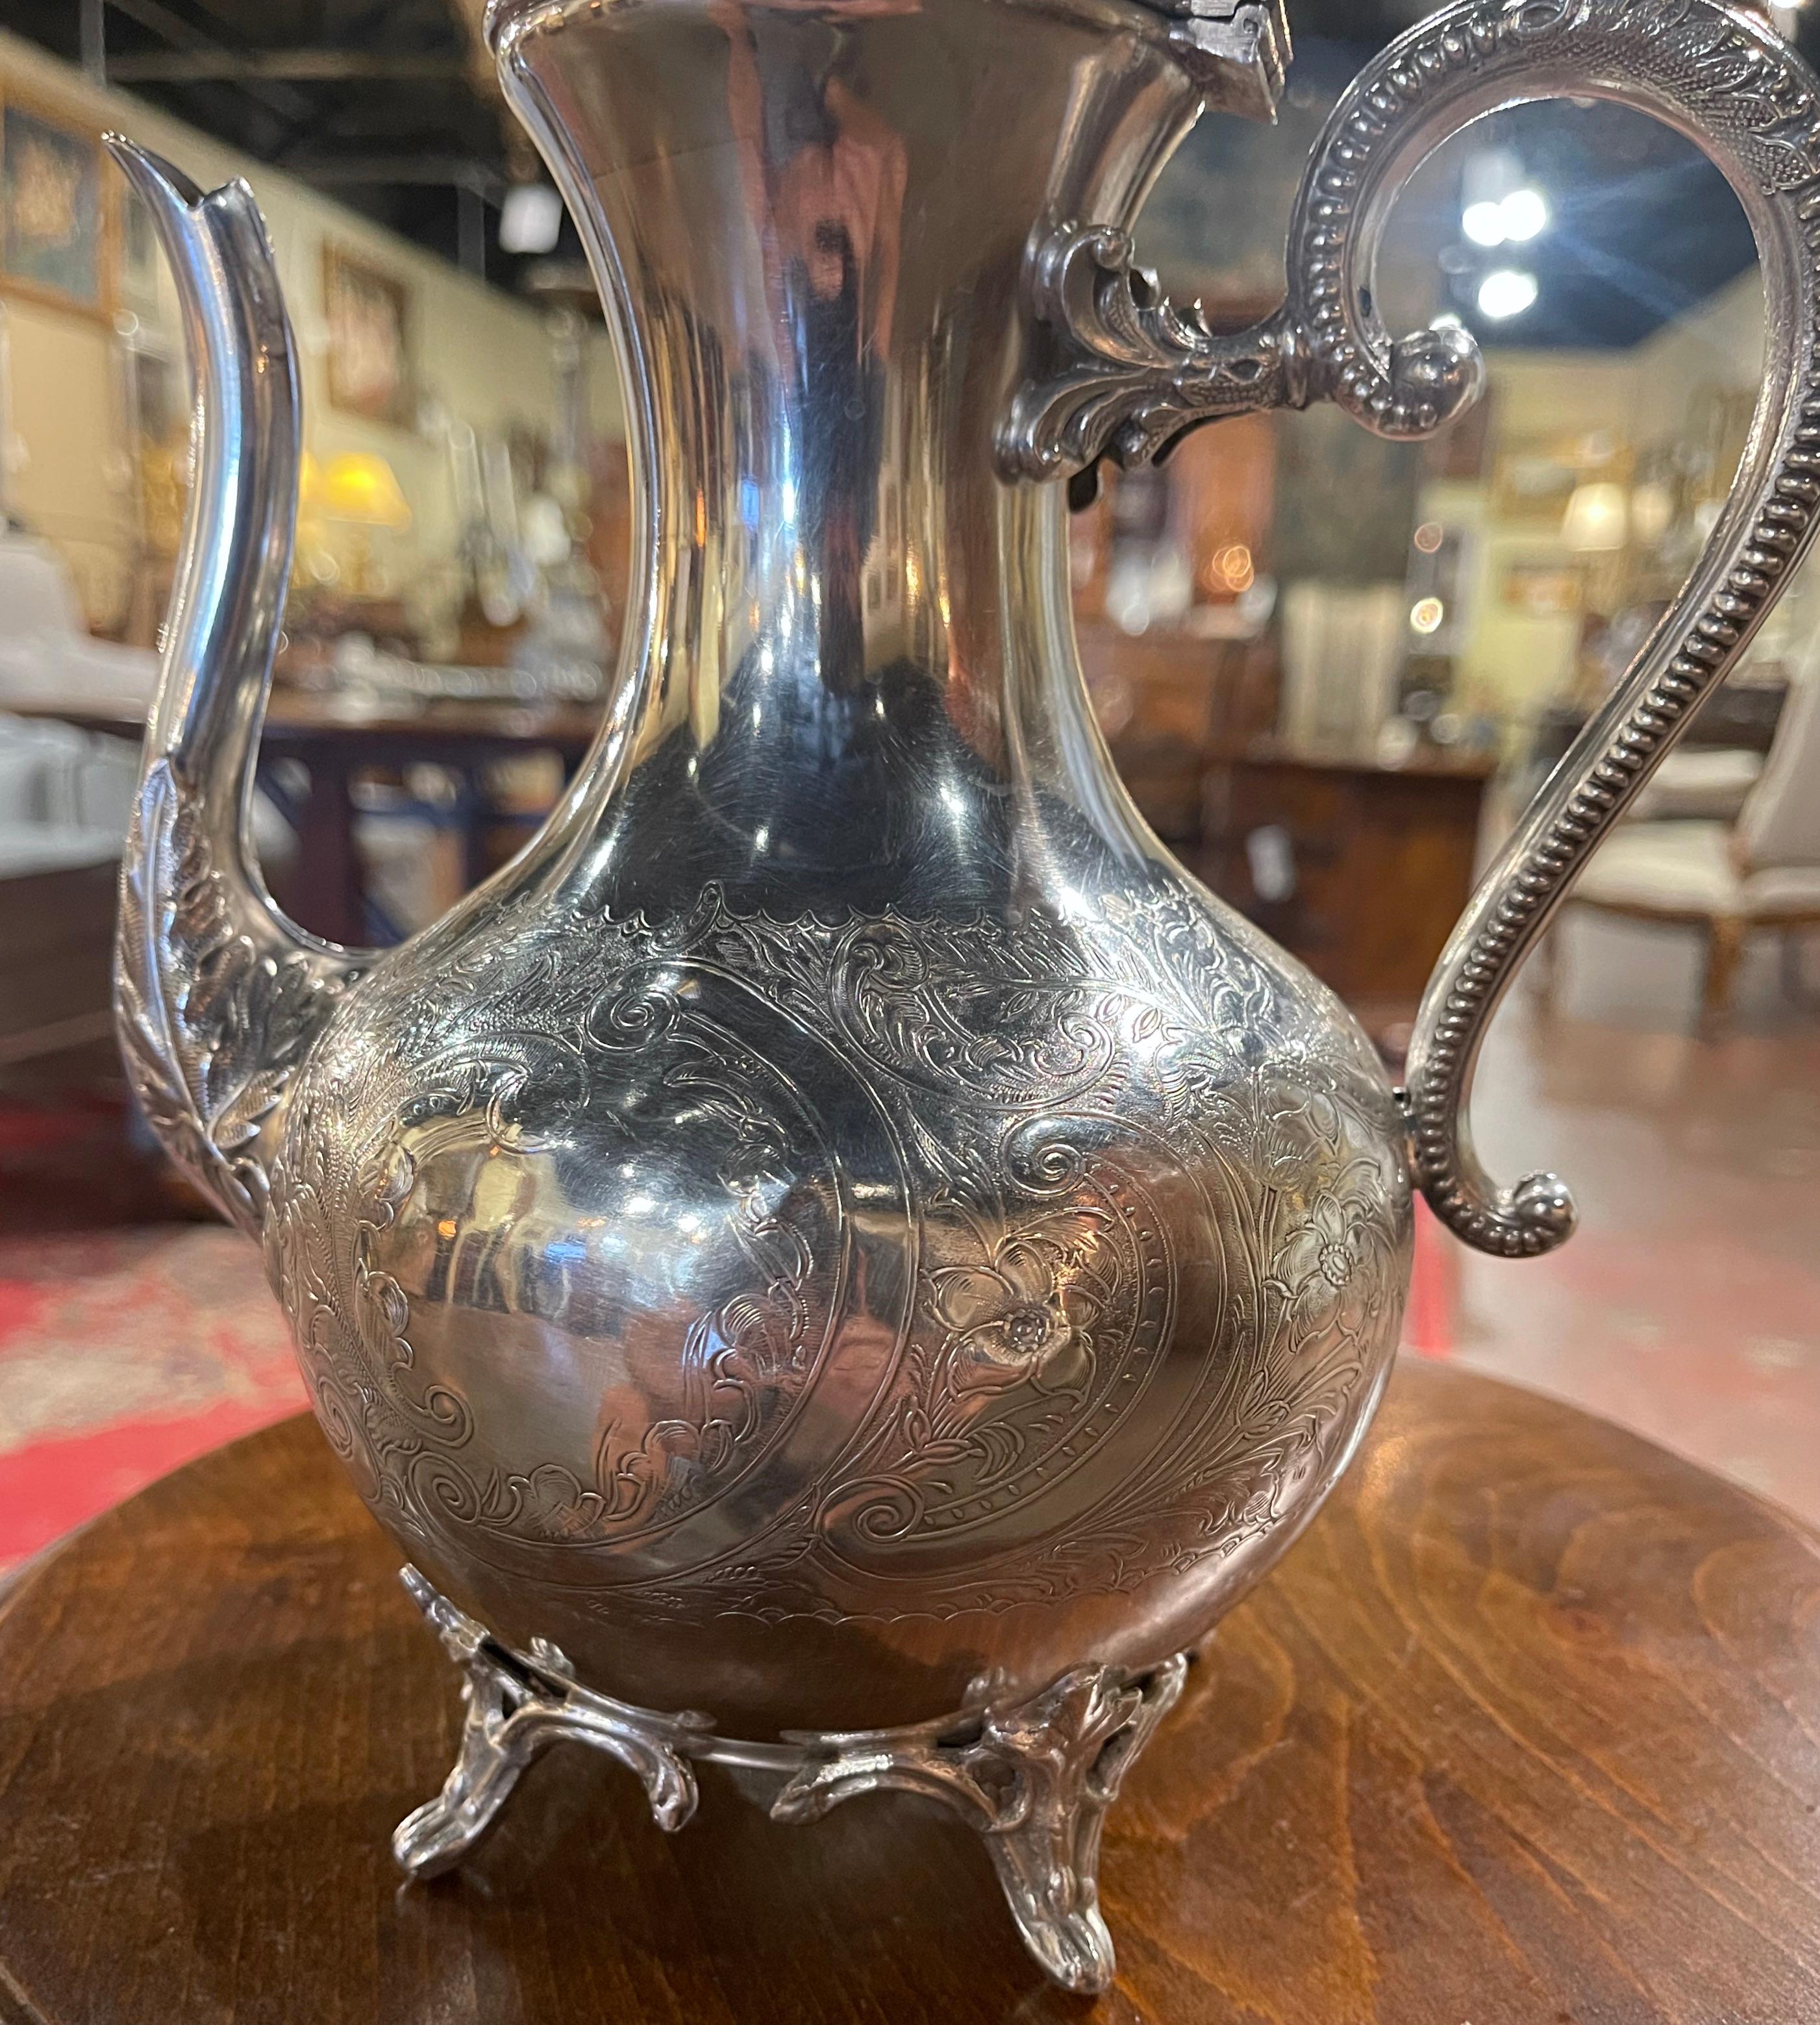 Crafted in France circa 1920 the teapot stands on four beautiful curved feet and features intricate leaf and flower motifs and a gleaming silver finish all throughout. The lid is decorated with a elegant flower finial for opening and closing the